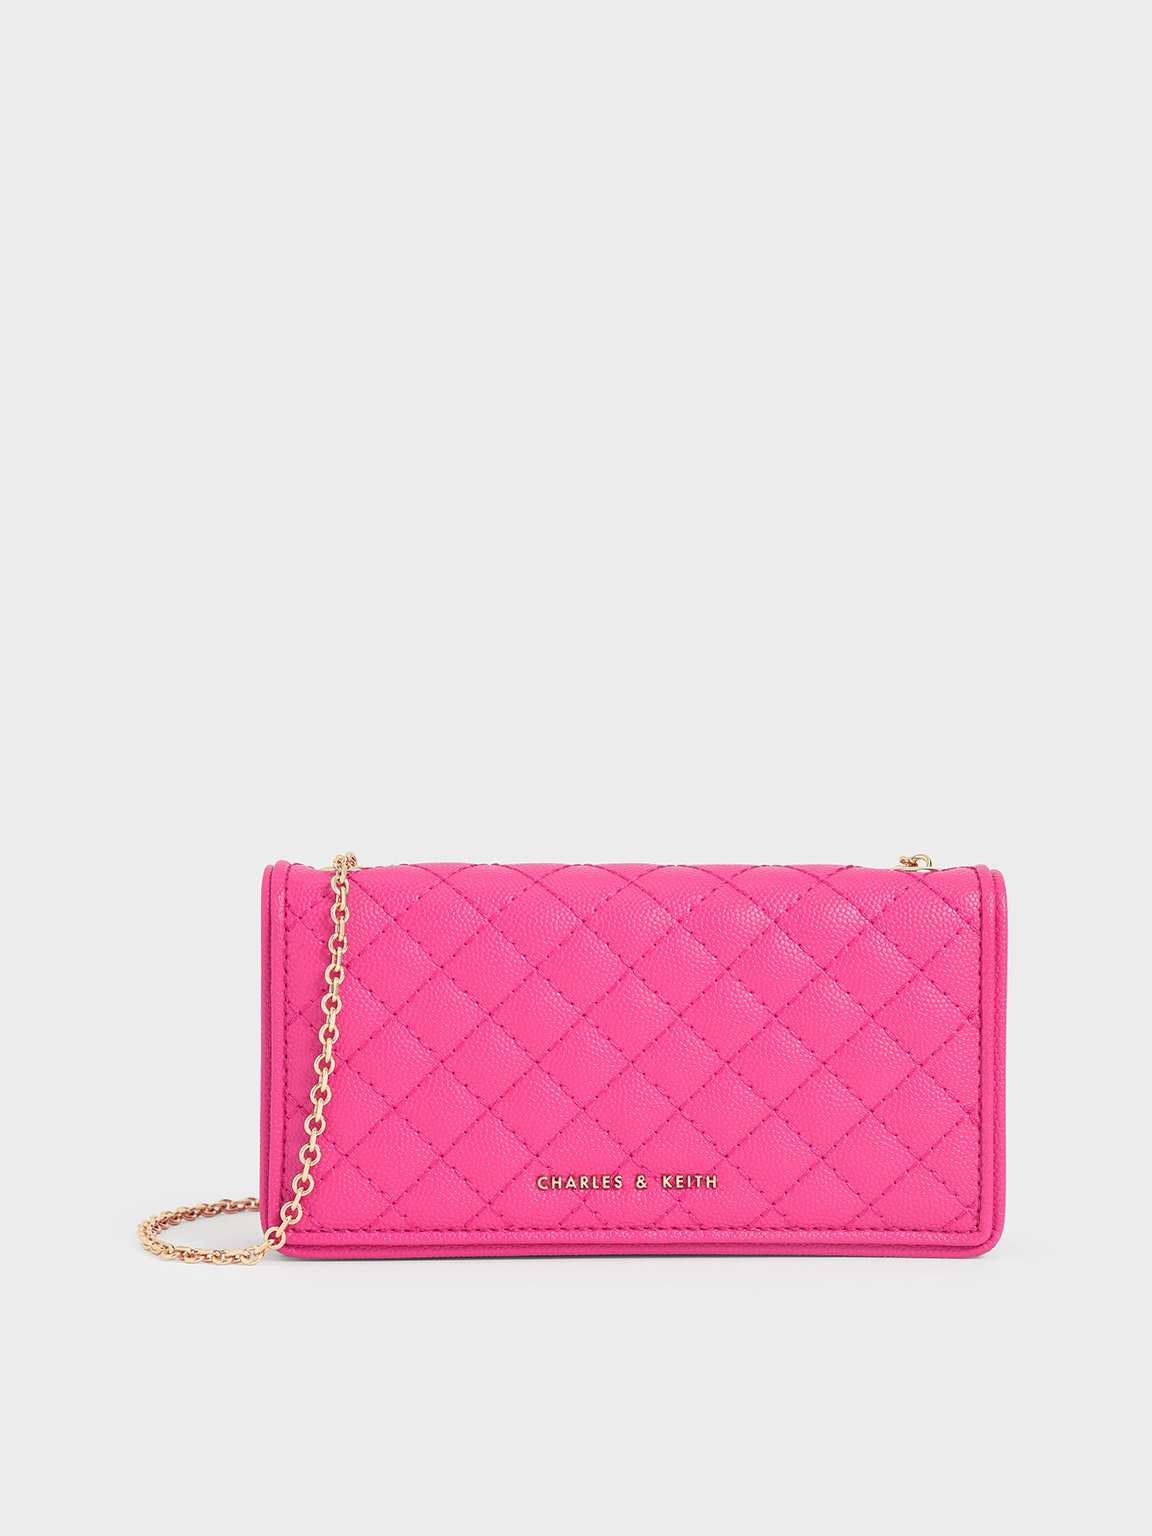 Quilted Pouch